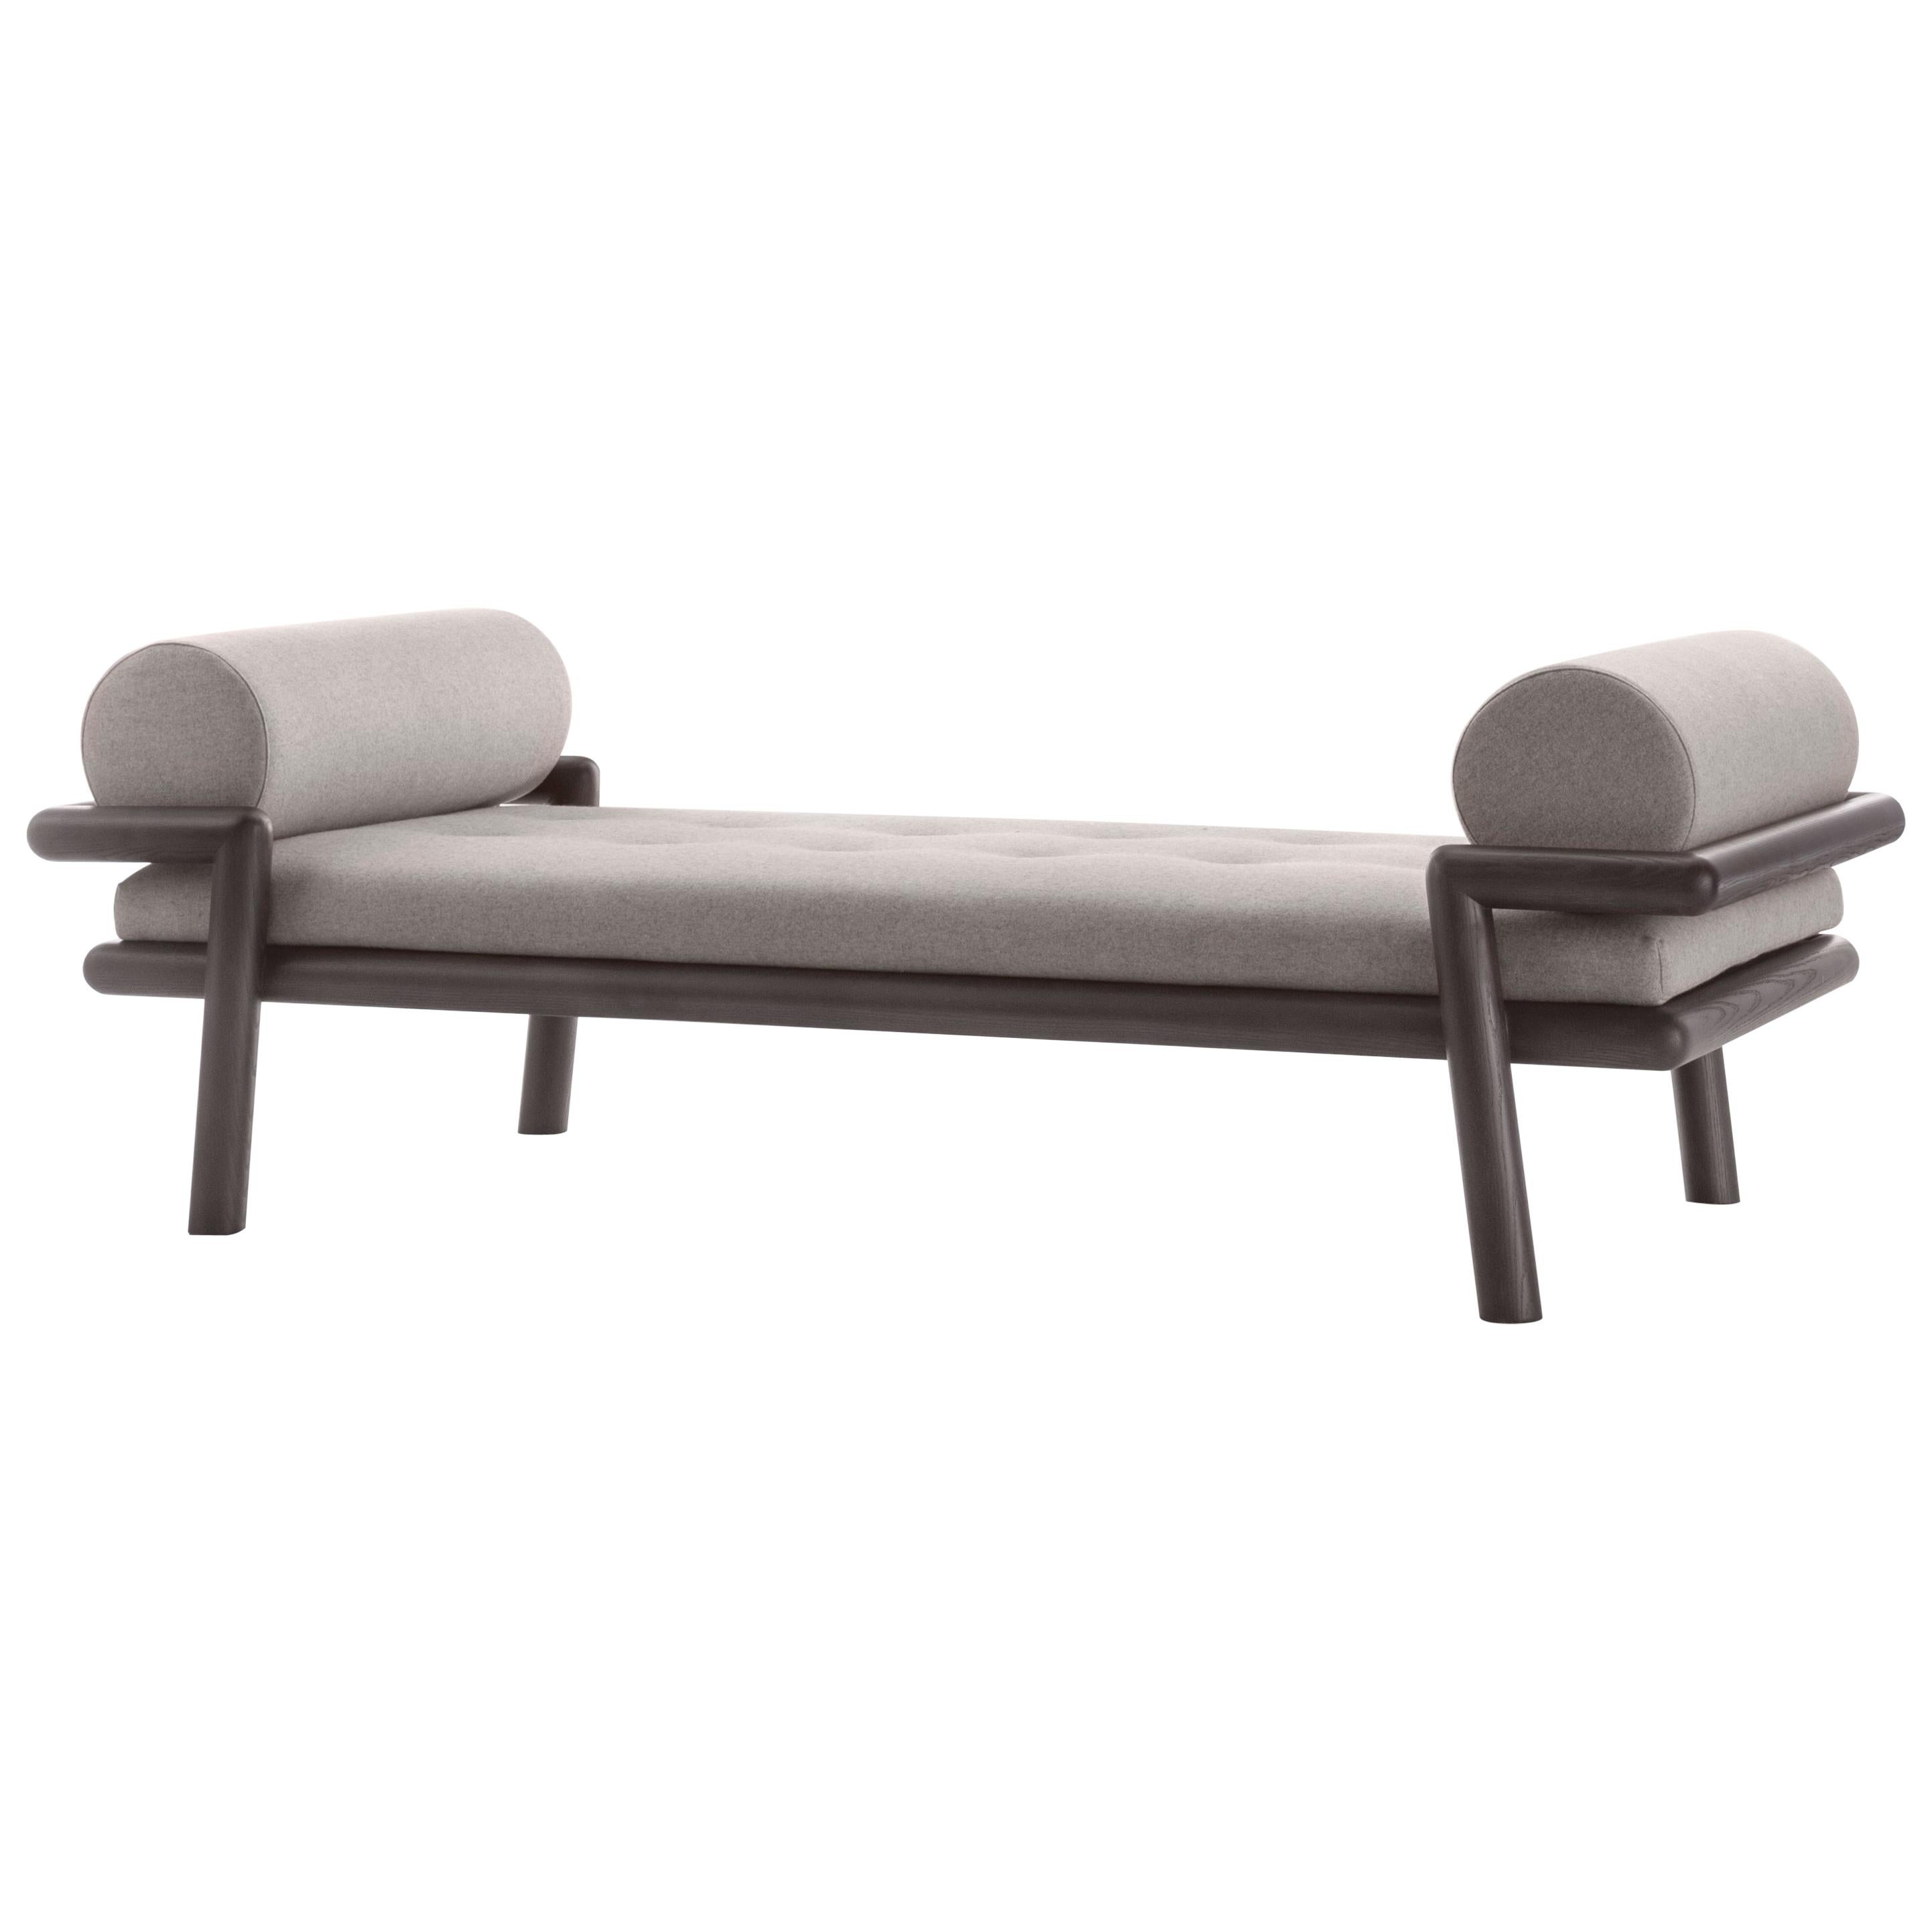 Gebrüder Thonet Vienna GmbH Hold On Daybed in Wenge Wood with Upholstered Seat